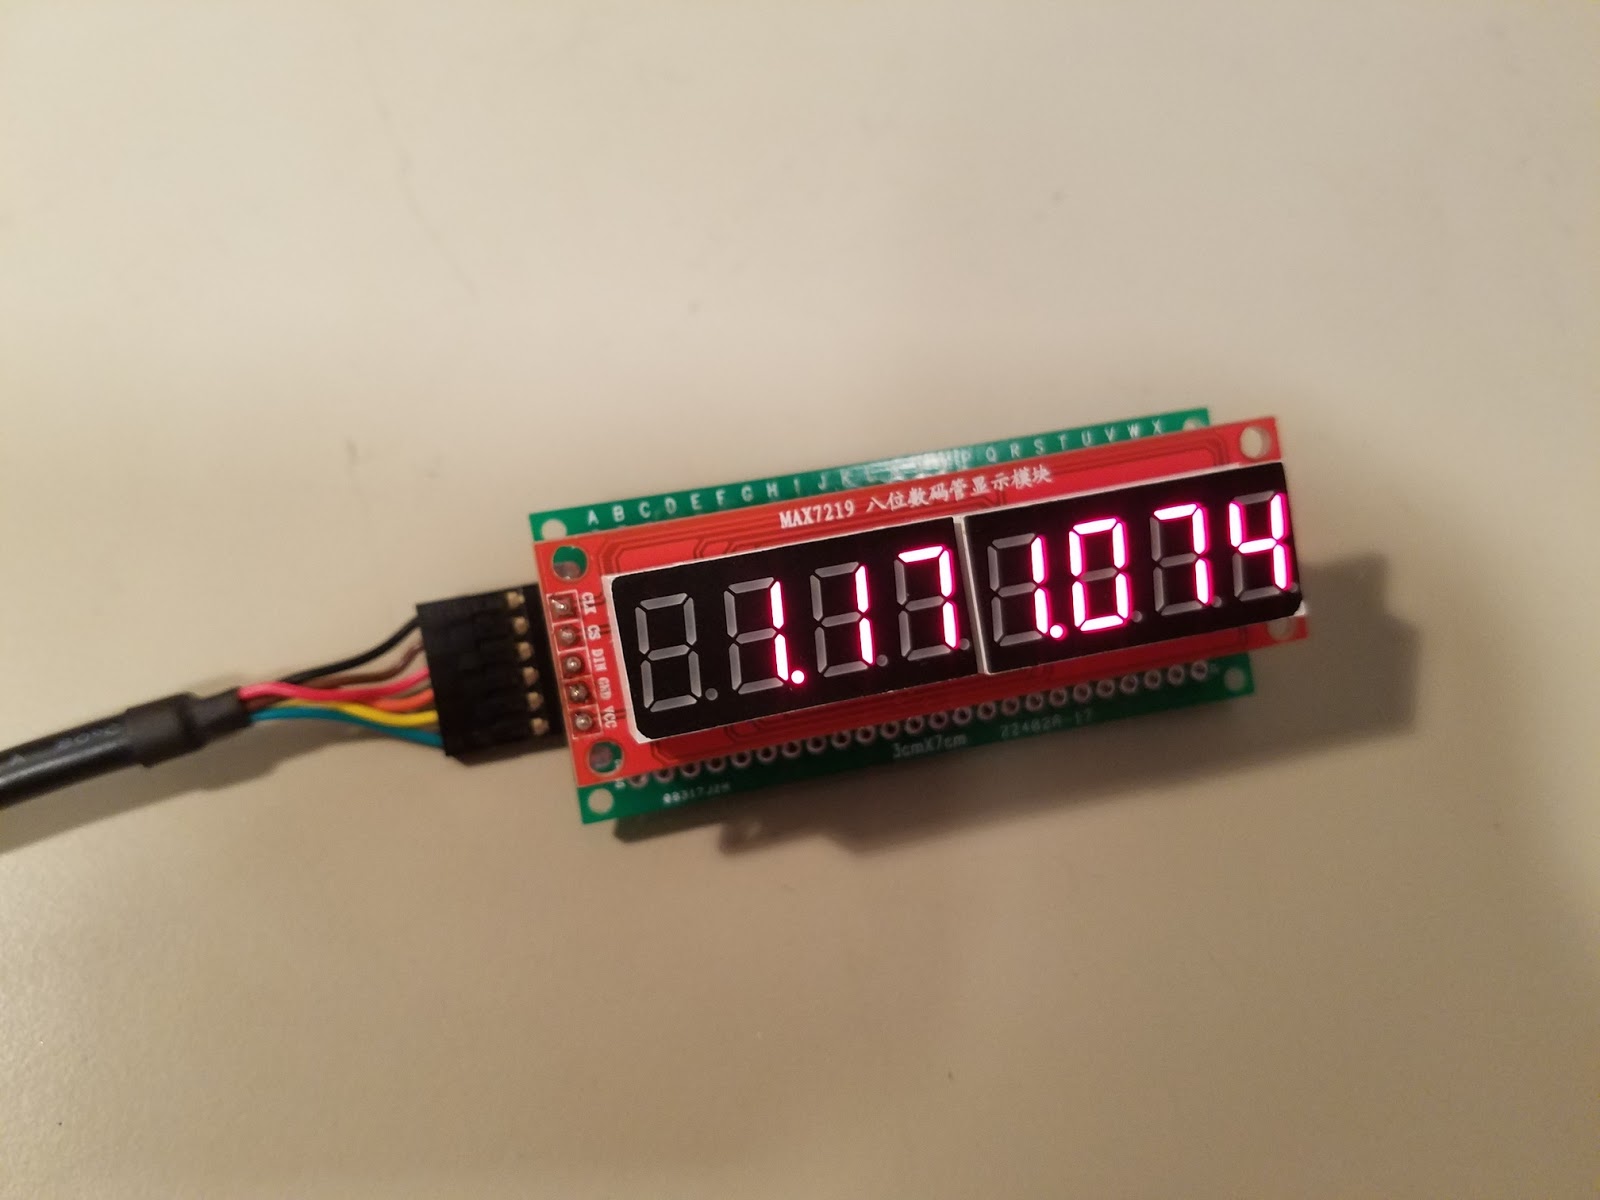 Youtube Channel Iot View Counter